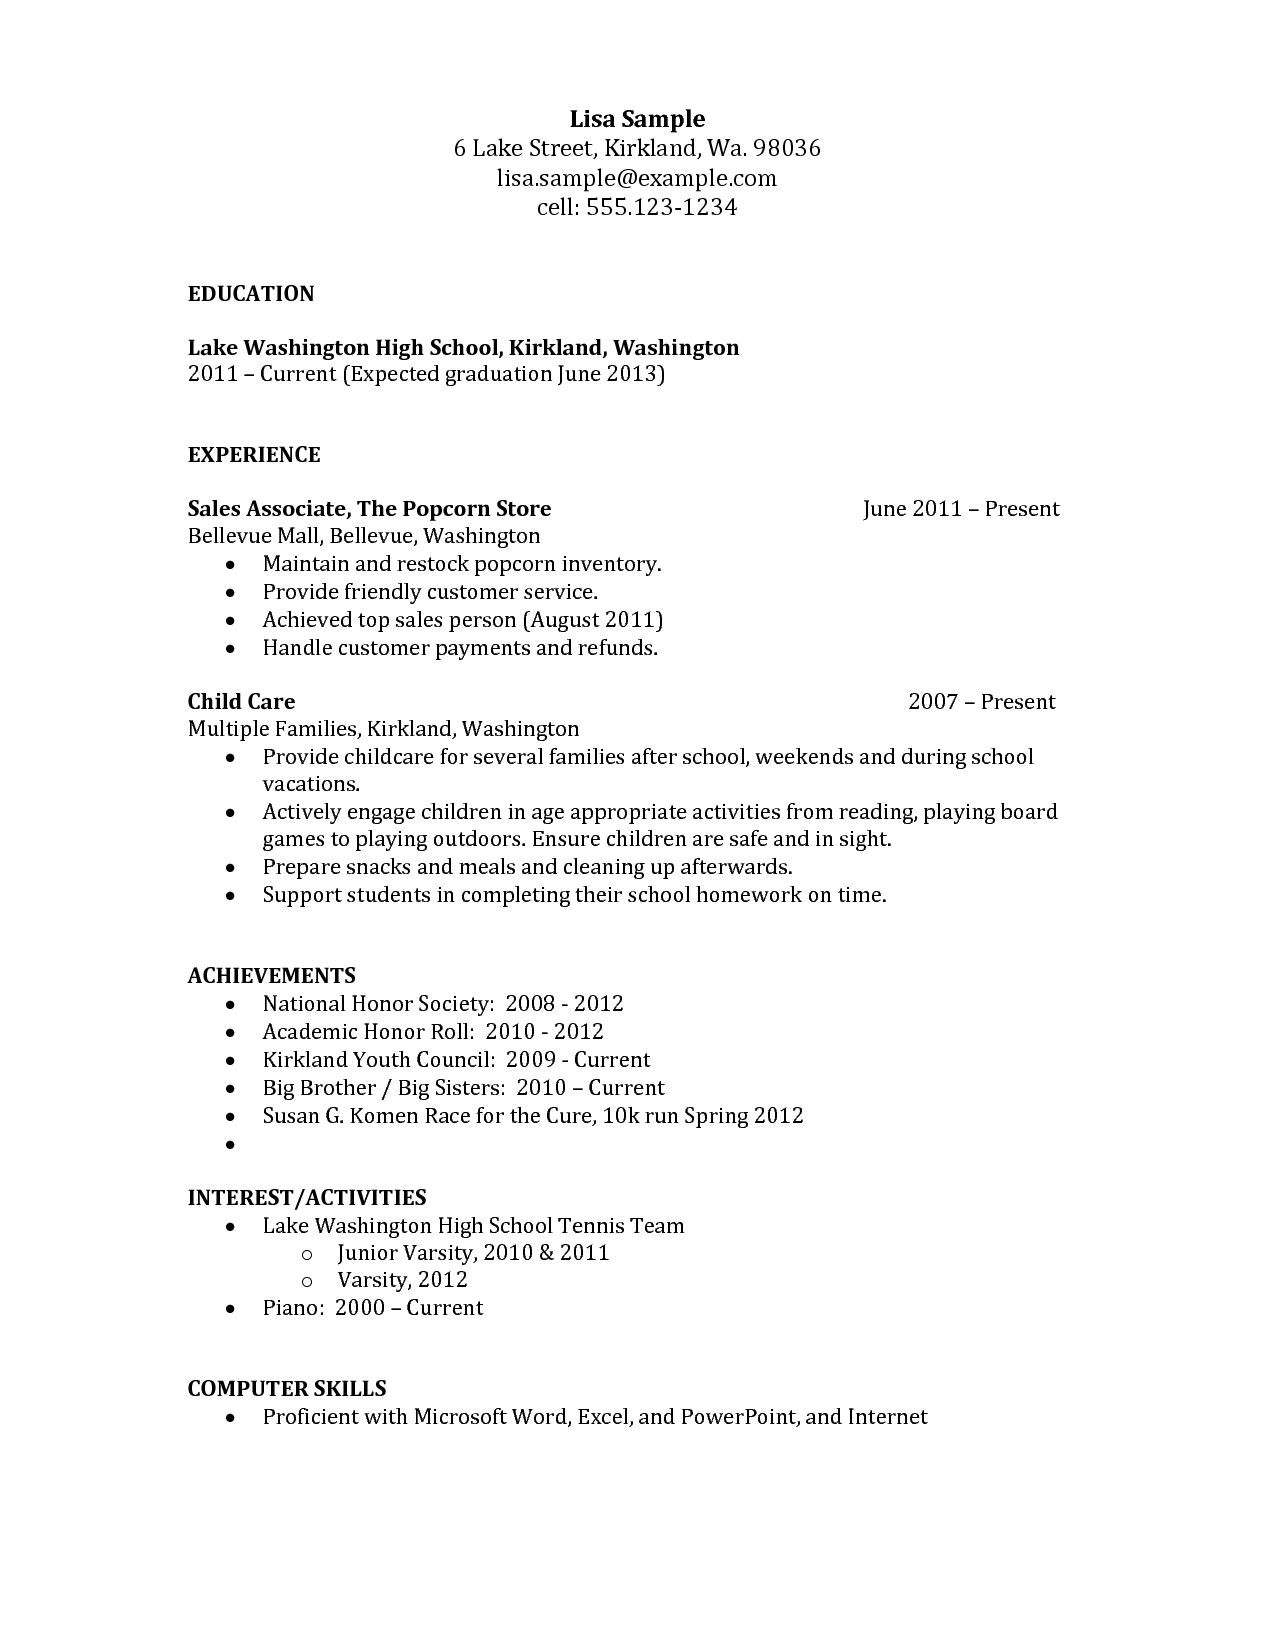 Sample Resume for High School Graduate without Experience Resume format High School Graduate , #format #graduate #resume …